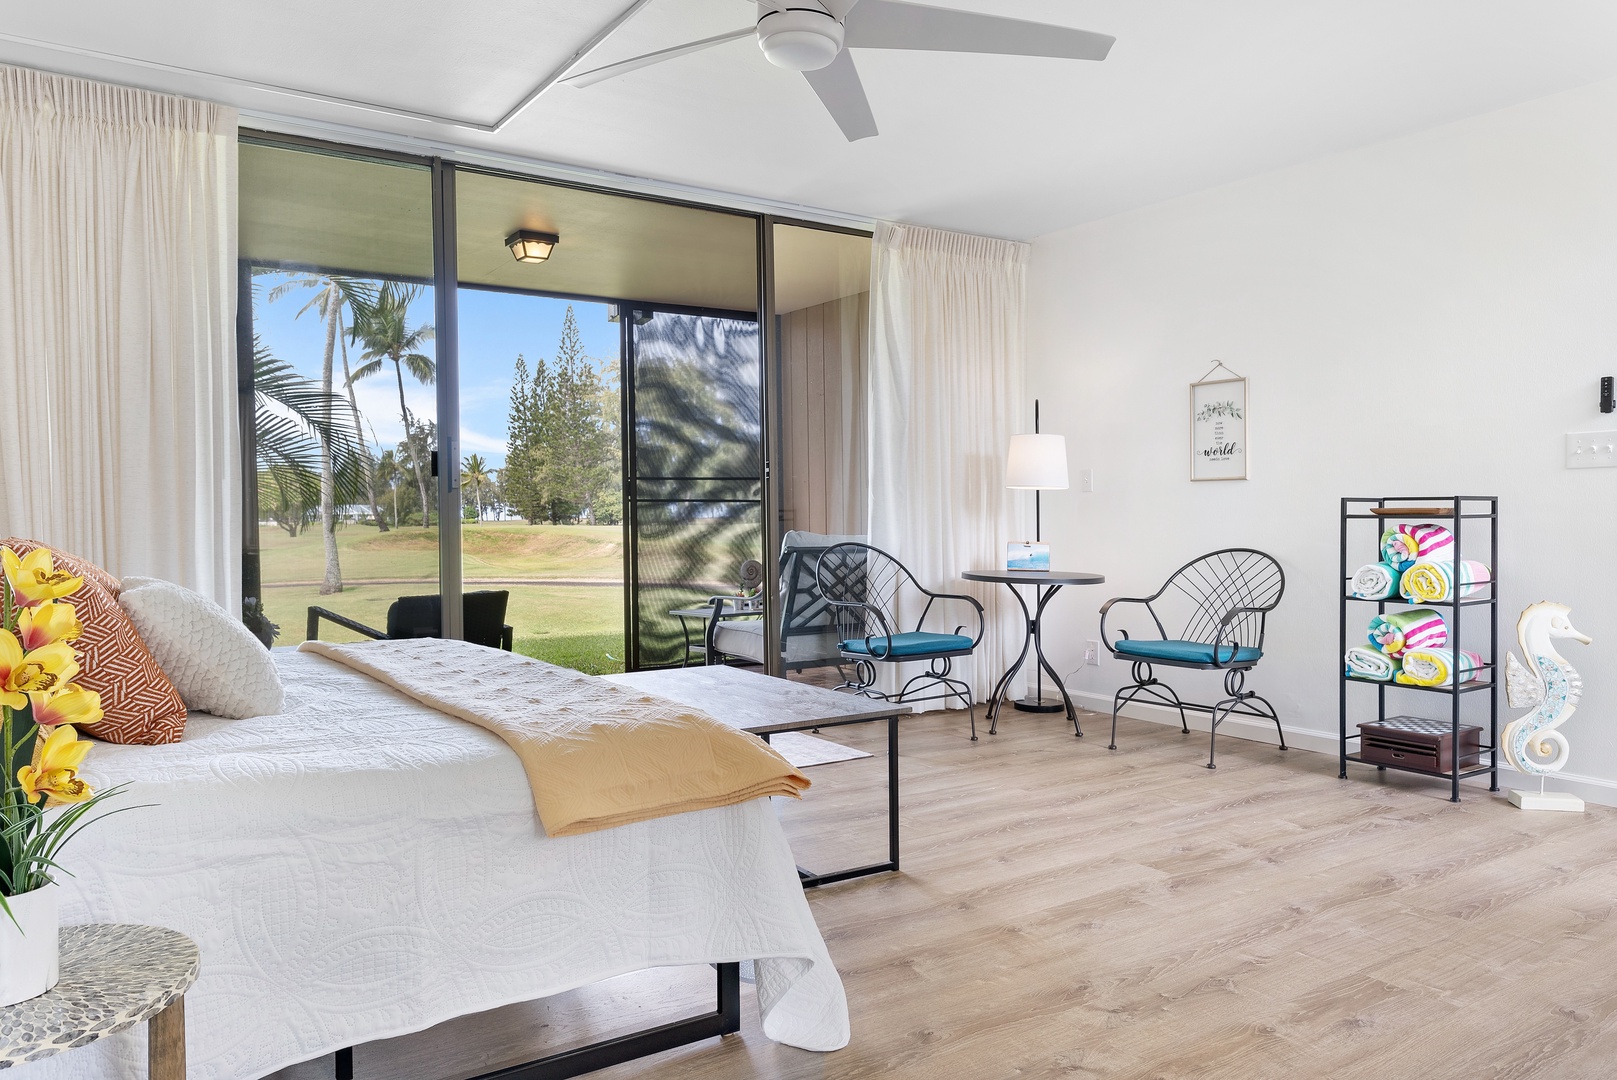 Kahuku Vacation Rentals, Kuilima Estates West #85 - Extra sitting area to have your morning coffee and enjoy the golf course views.